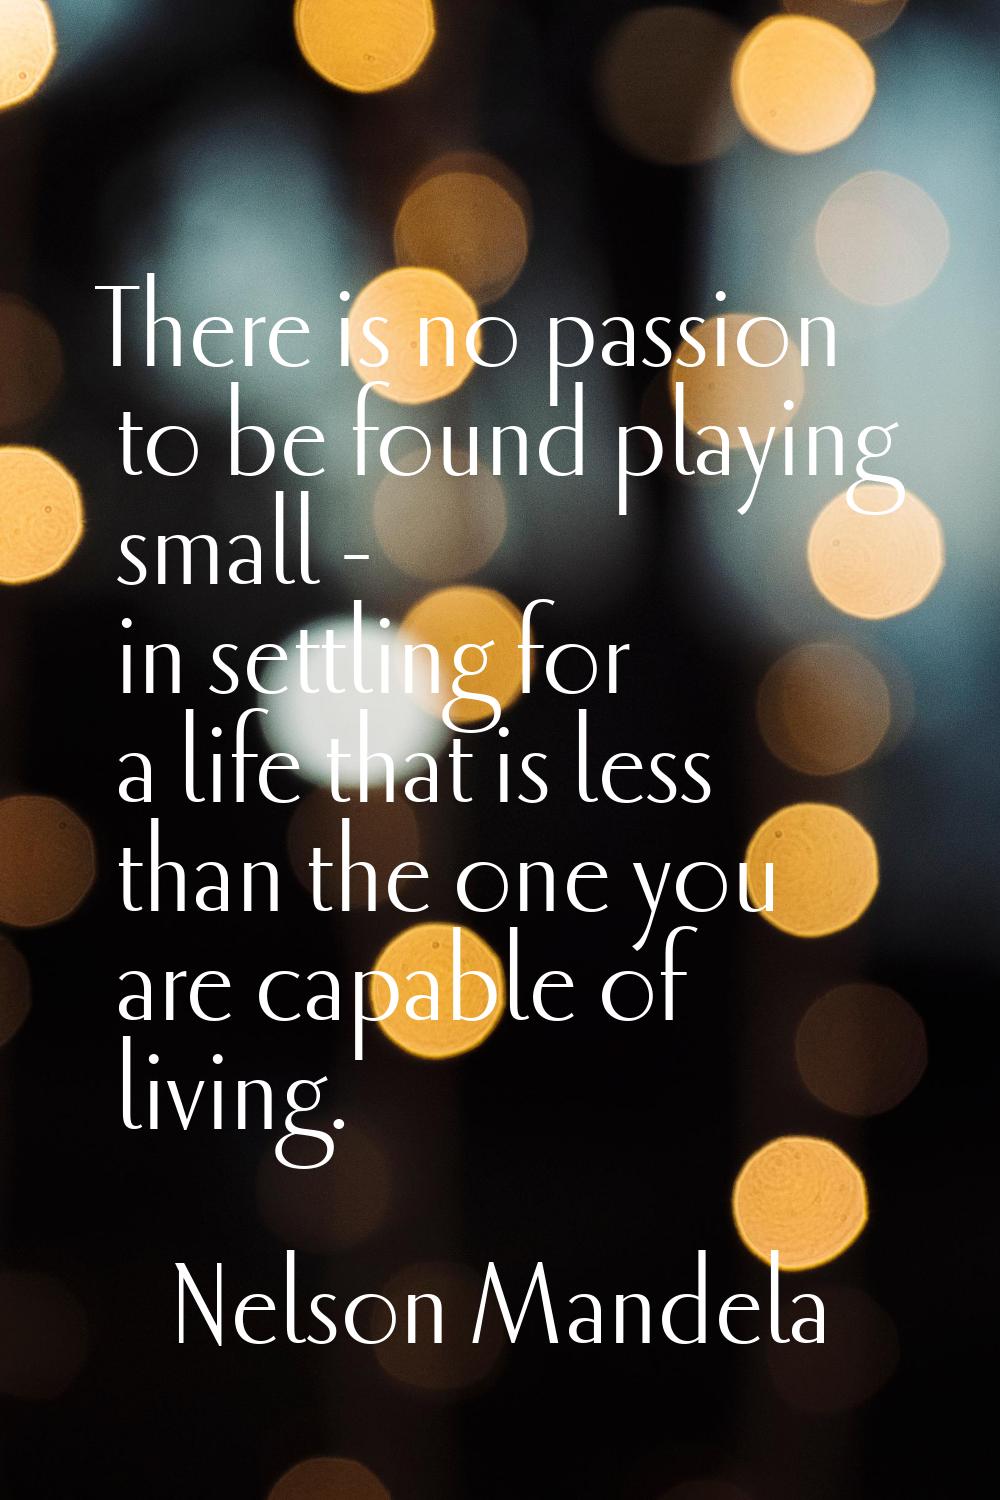 There is no passion to be found playing small - in settling for a life that is less than the one yo